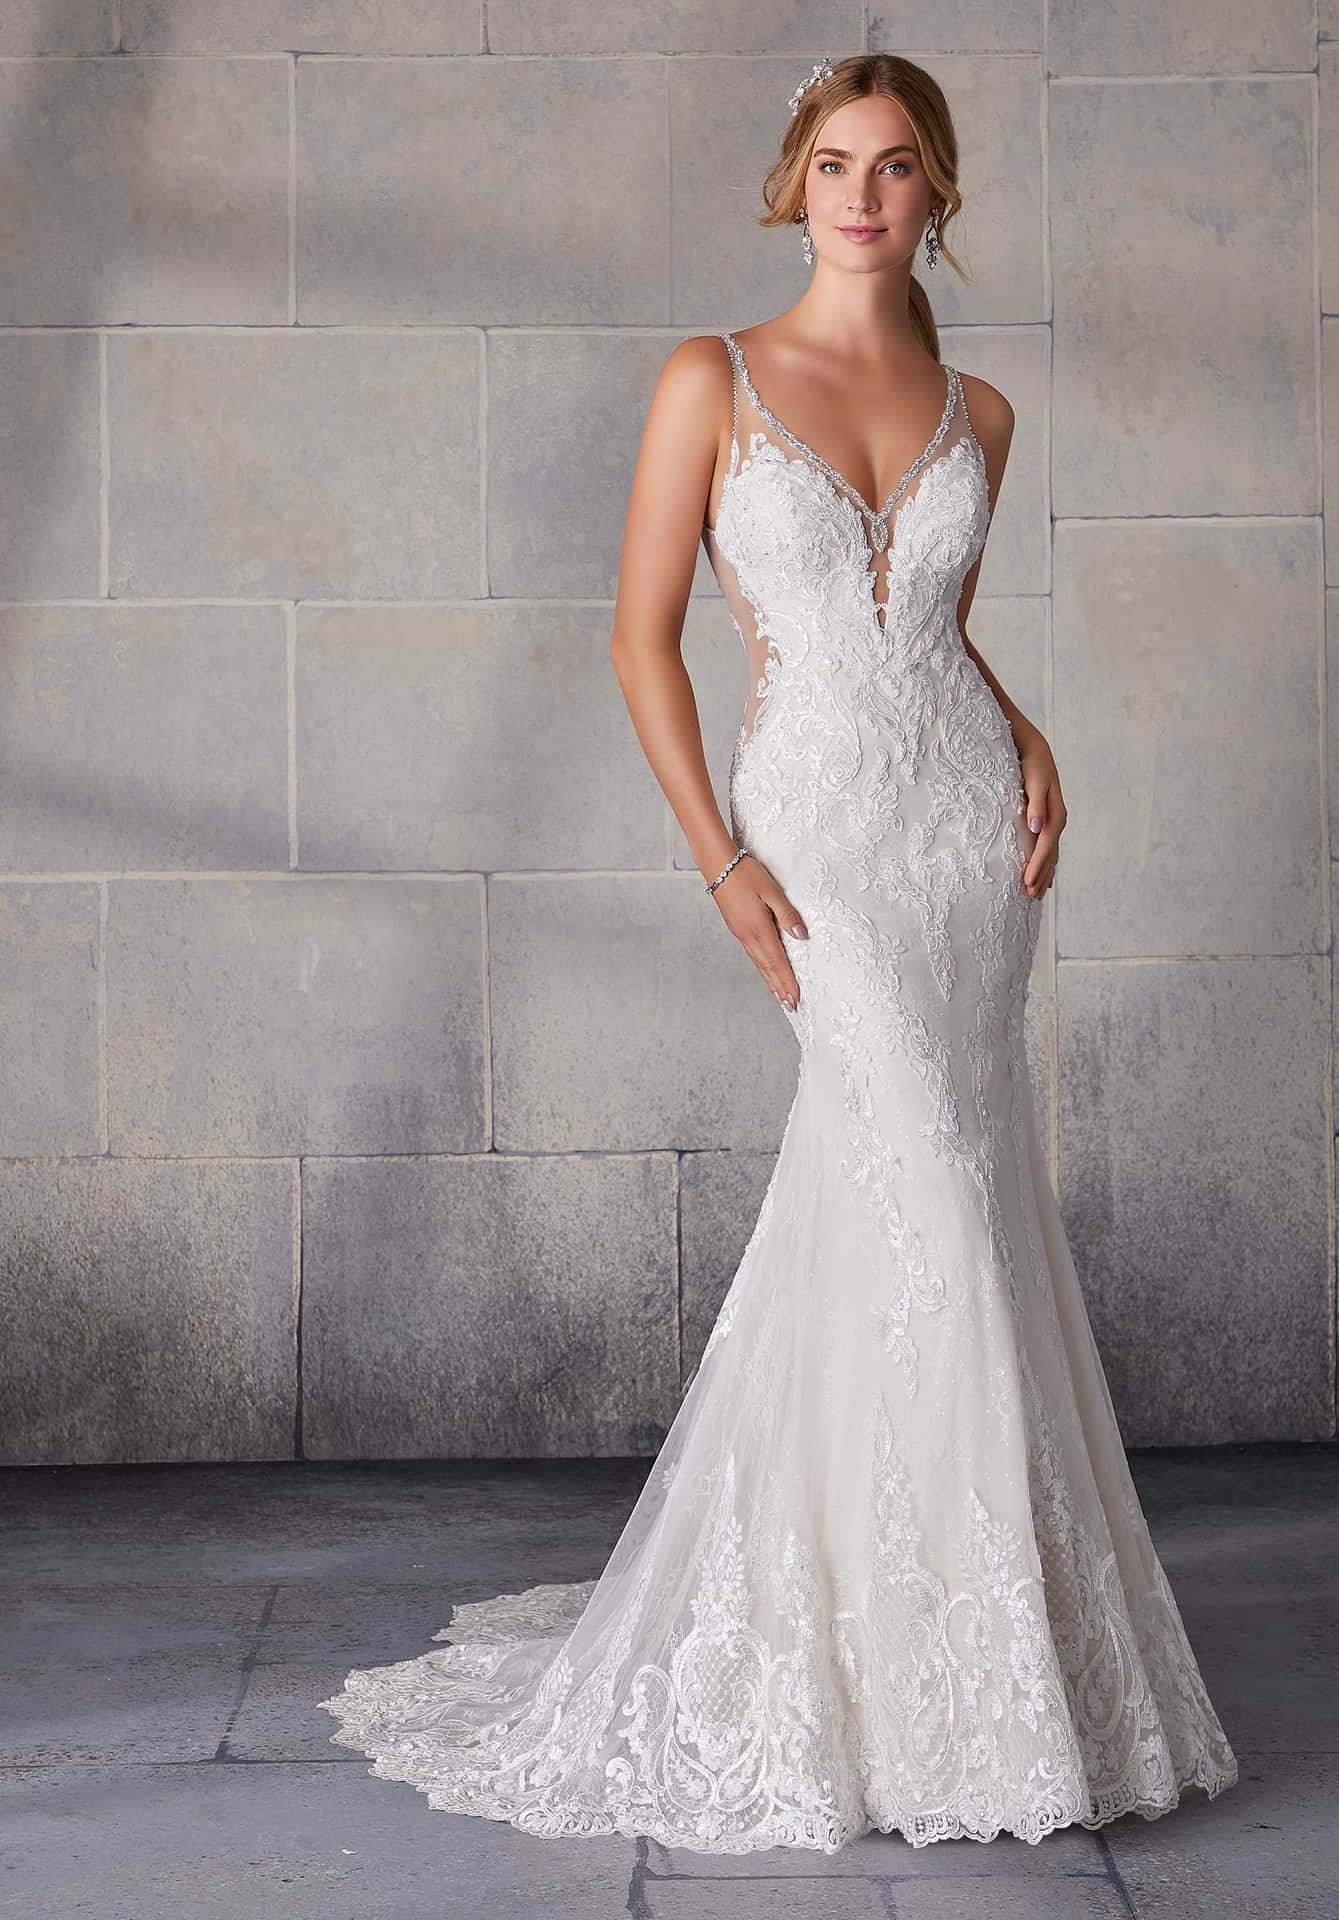 A Mermaid Wedding Dress With A Lace Overlay And A V Neck